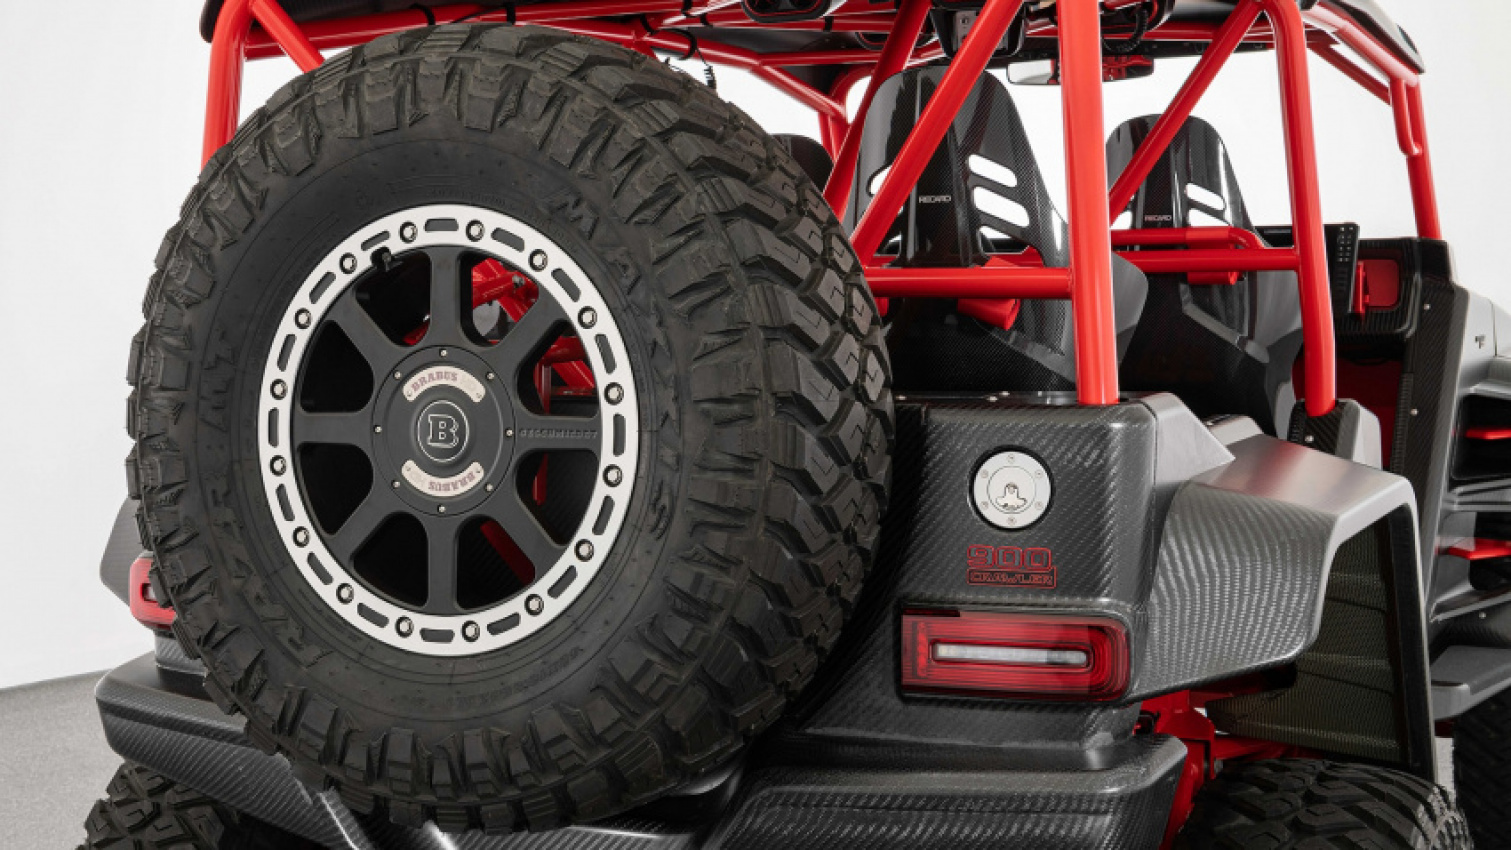 autos, cars, features, vnex, the brabus 900 crawler is a tubular twin-turbo desert toy with portals